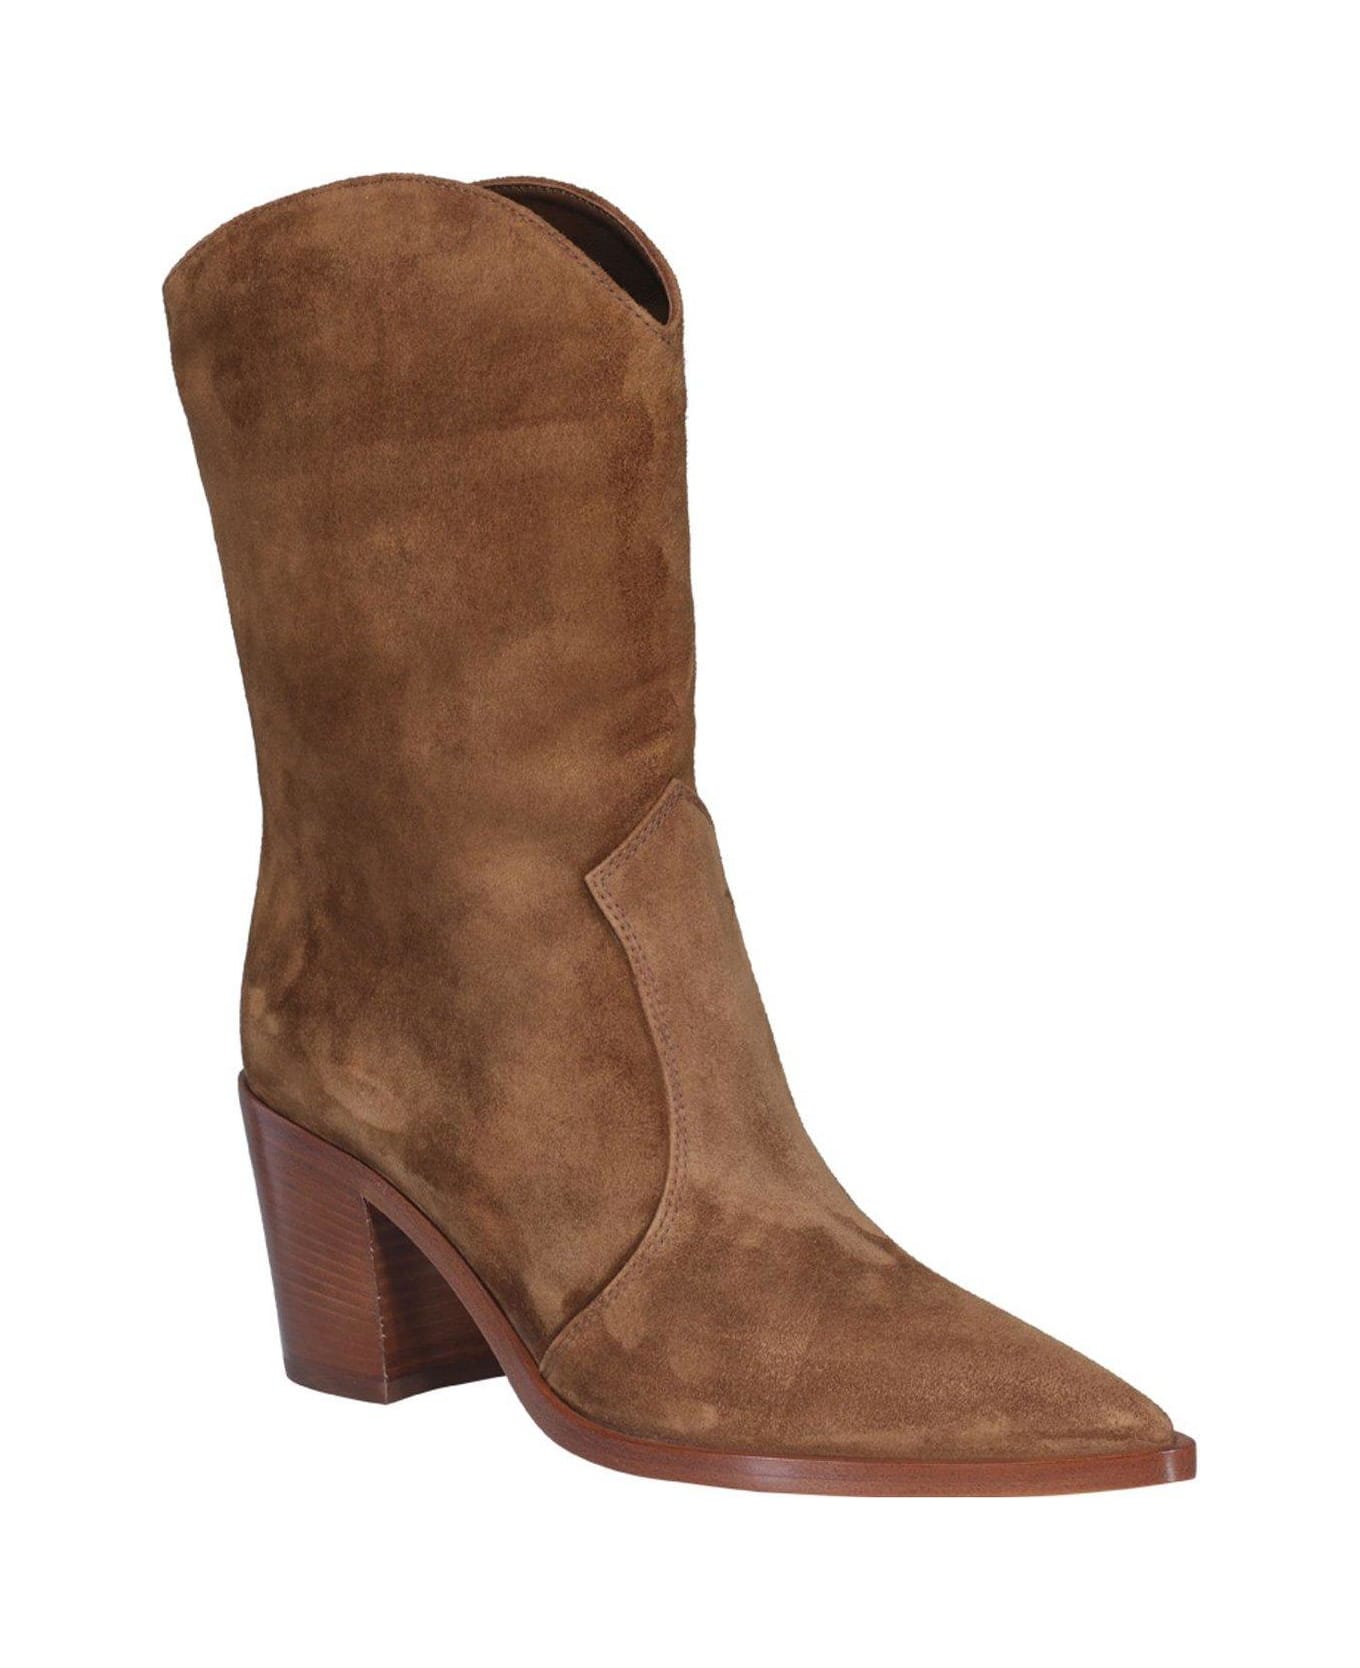 Gianvito Rossi Denver Pointed-toe Boots - TEXAS